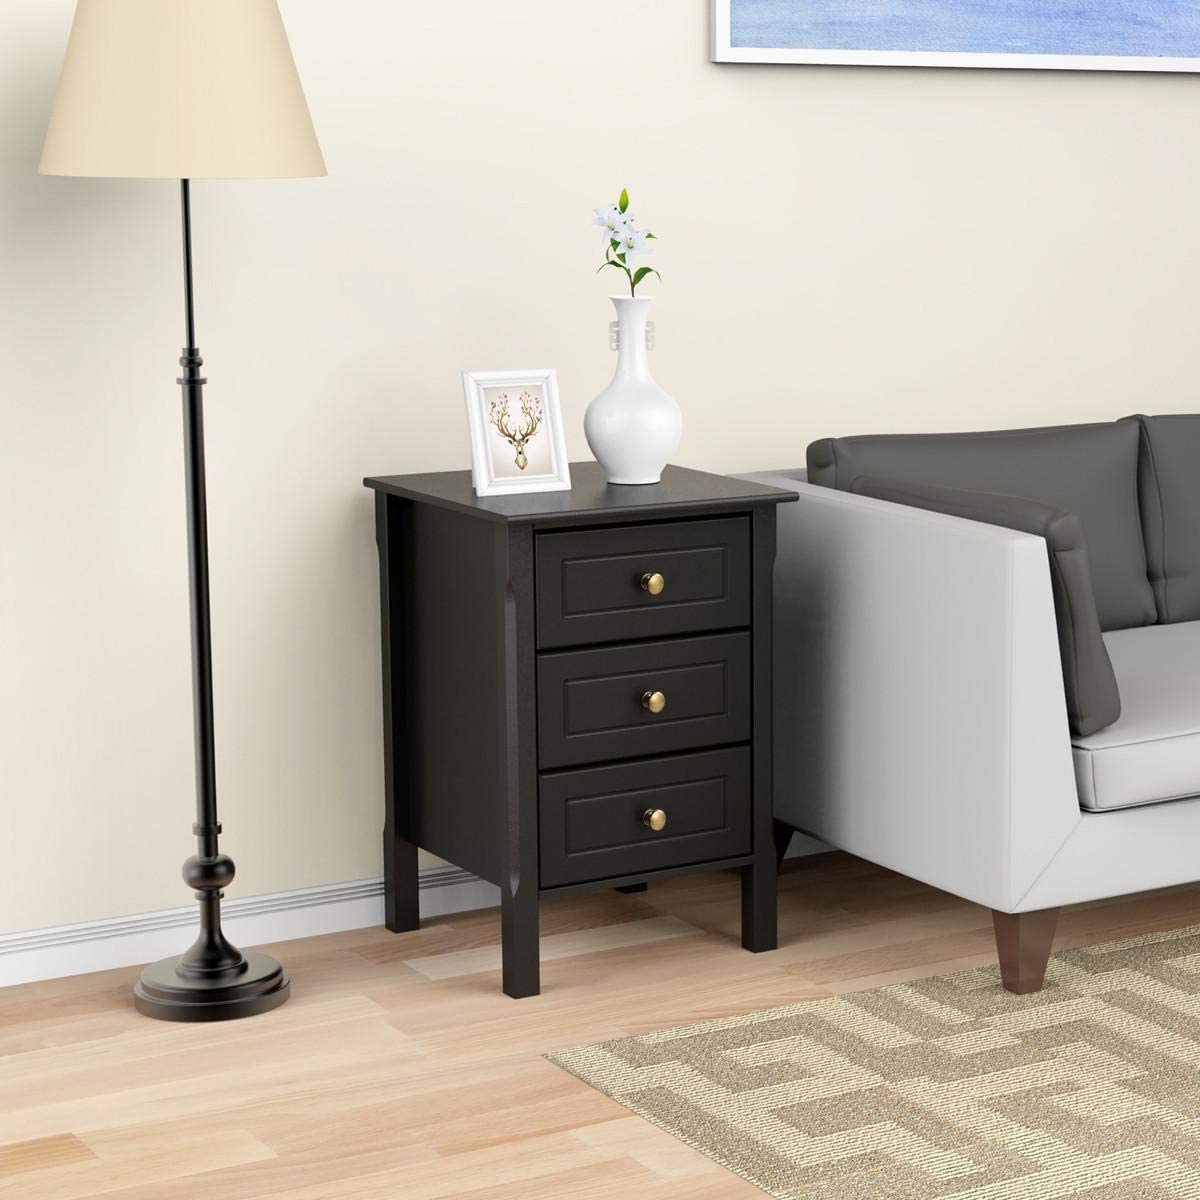 Campton Black Bedside Table with 3 Drawers